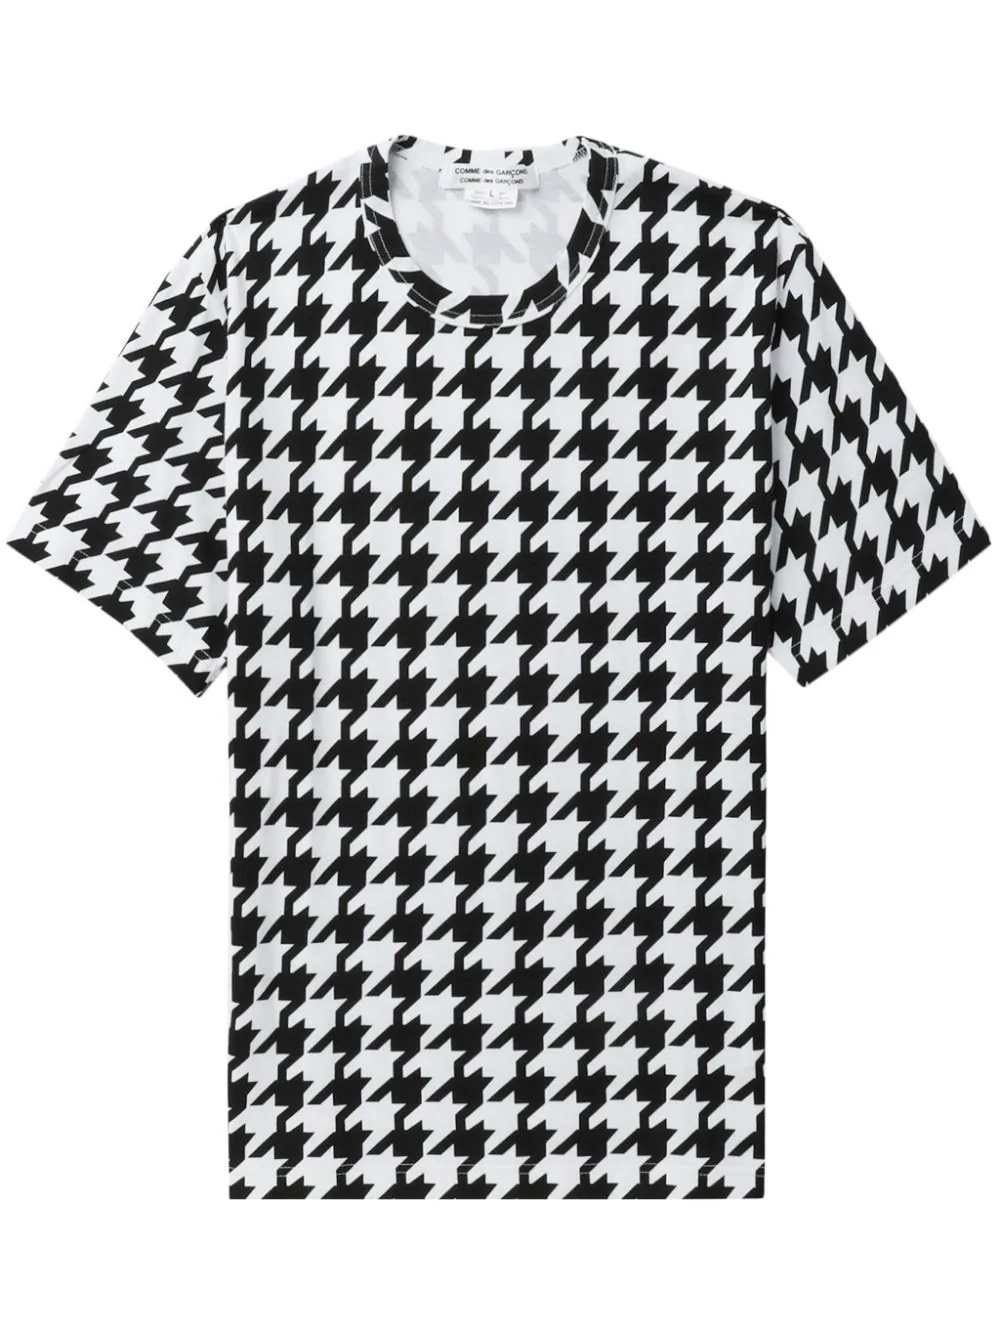 Houndstooth Pattern Tee - 1